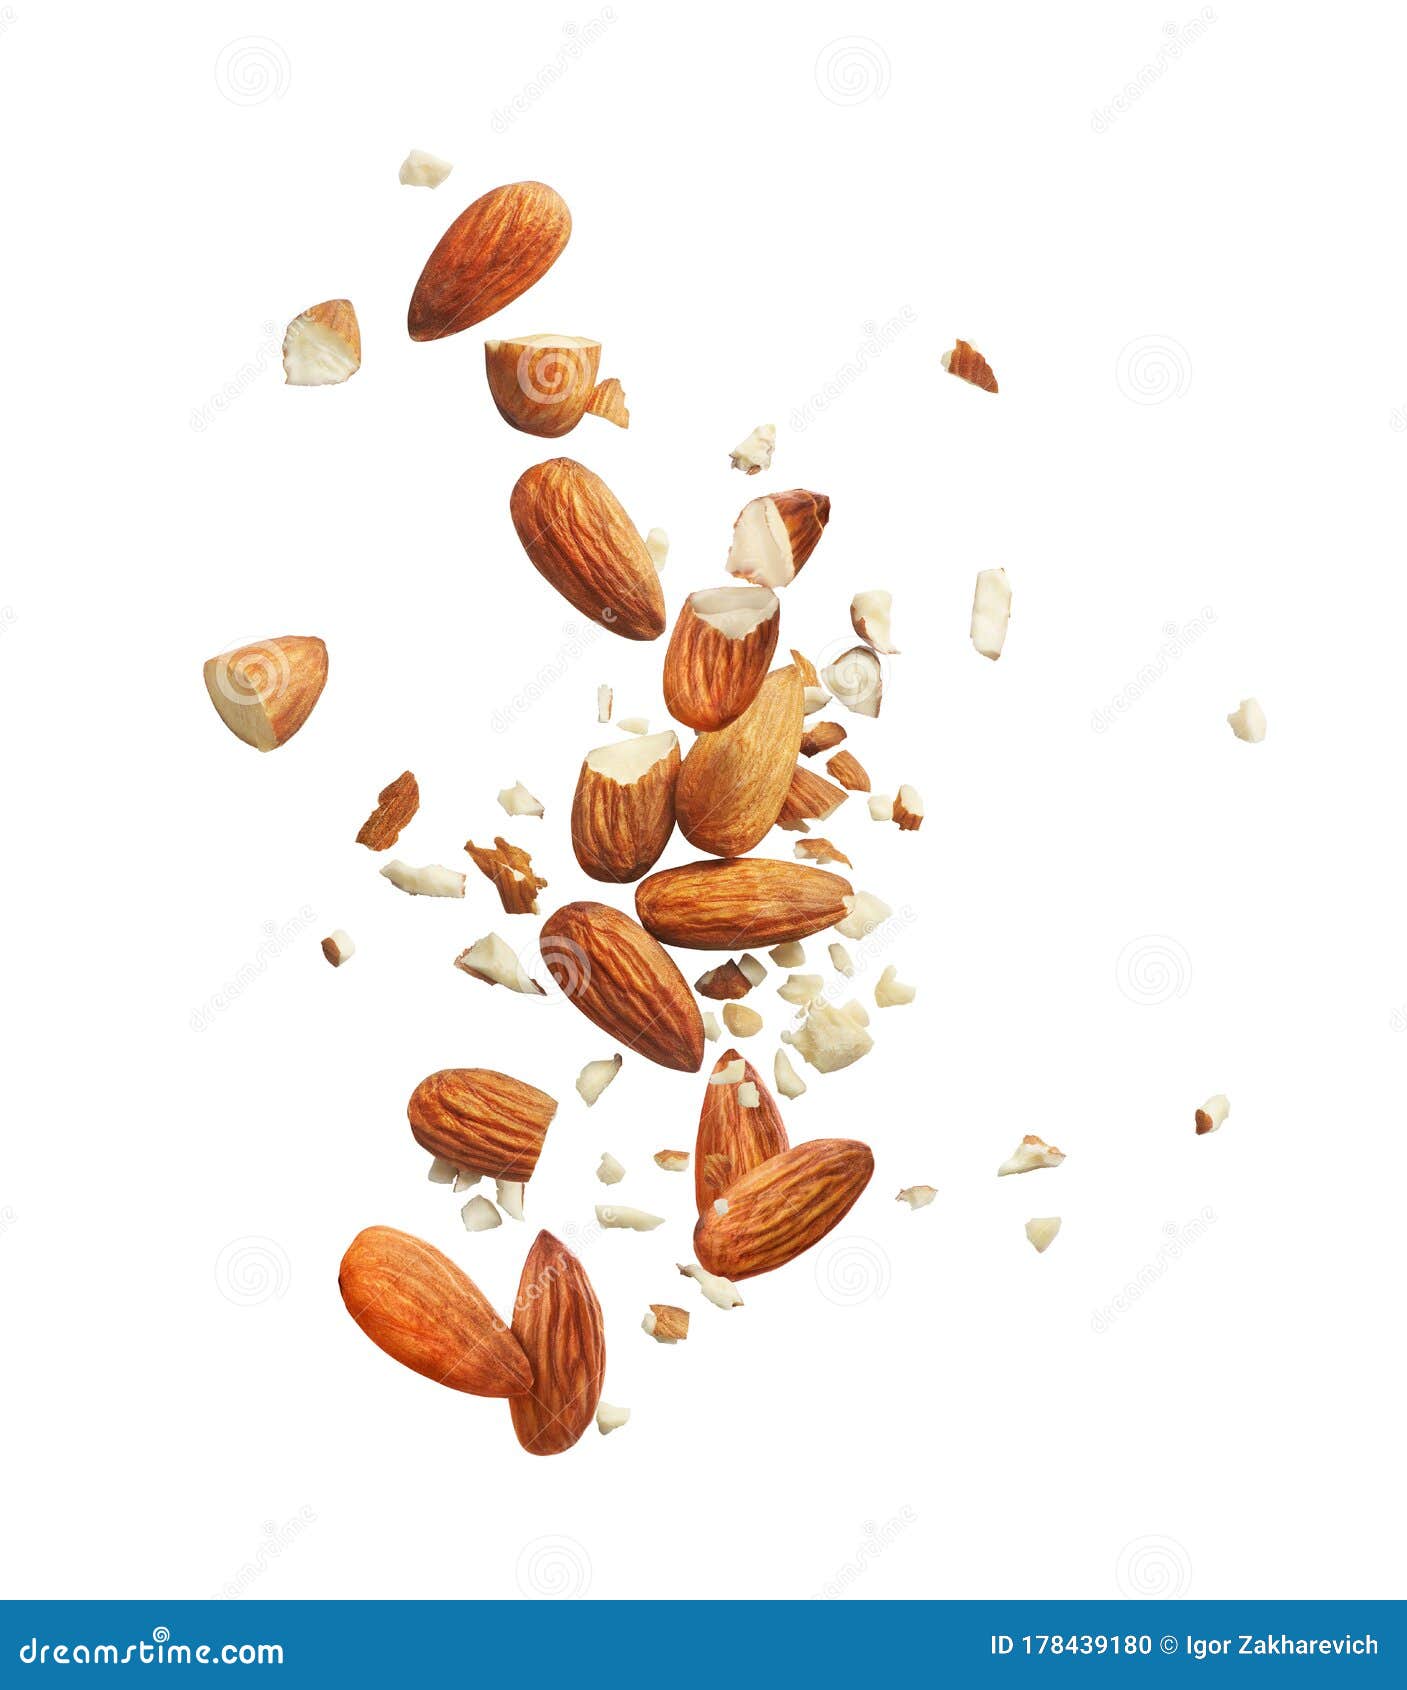 whole and crushed almonds